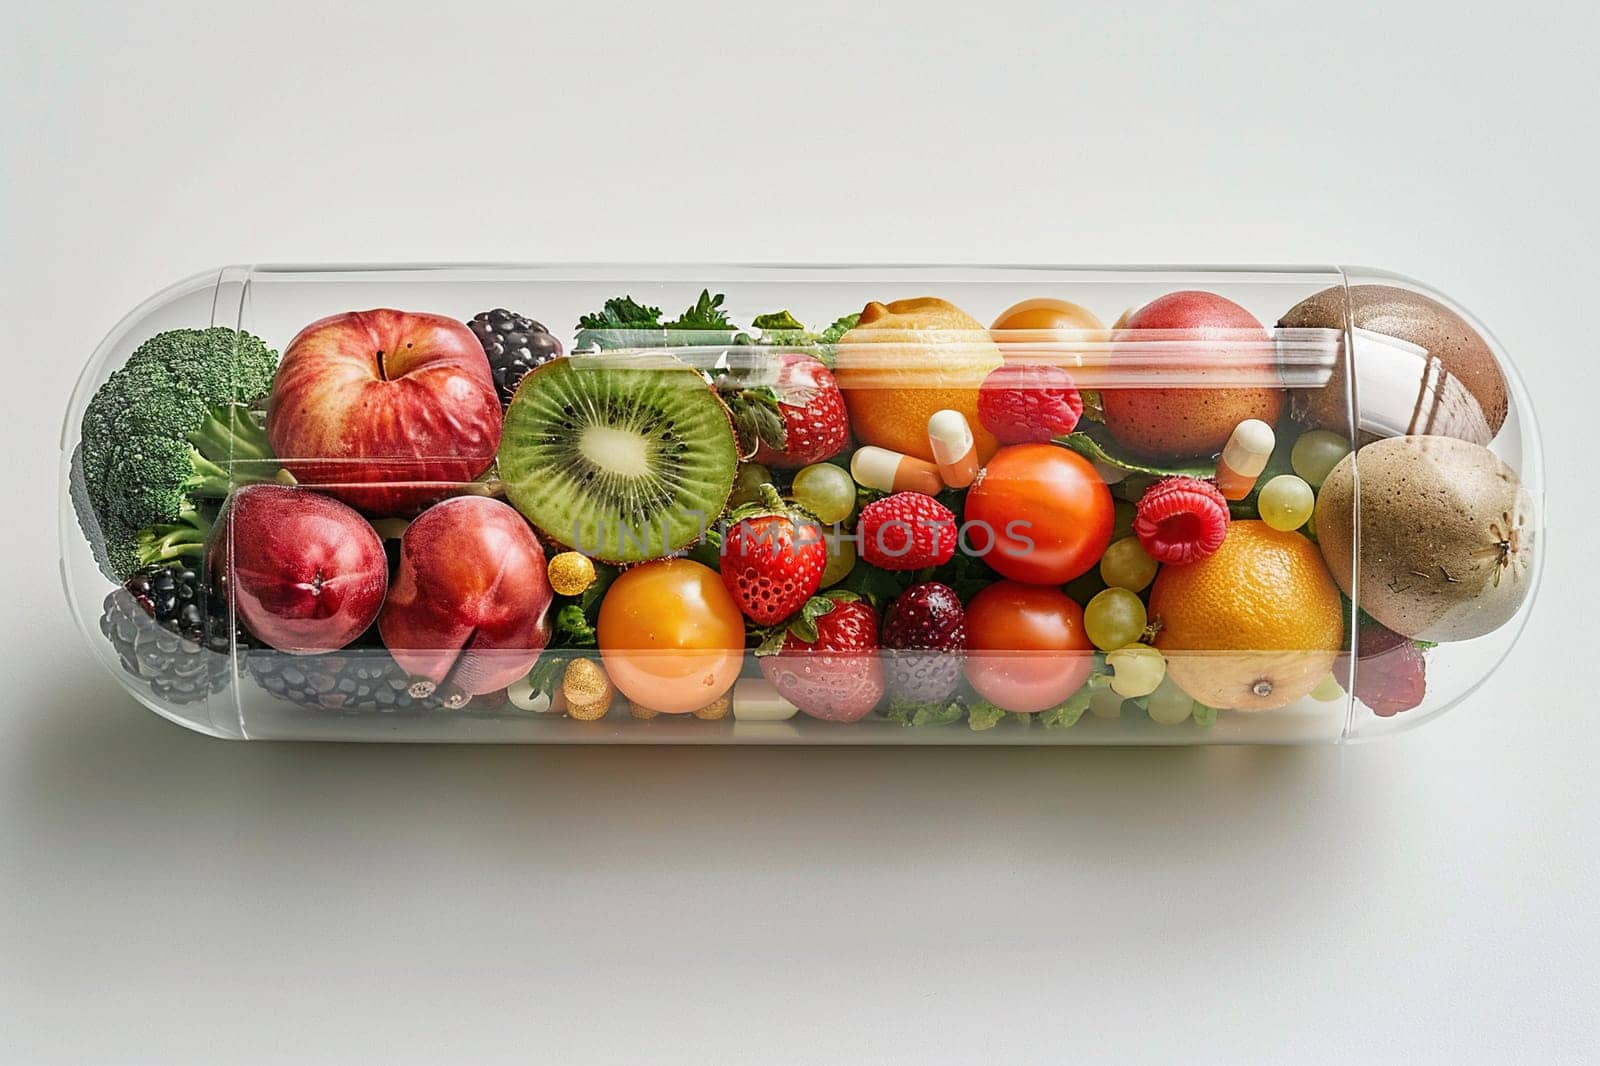 Health capsule. Transparent capsule with fruits and vegetables inside. Dietary supplements concept.